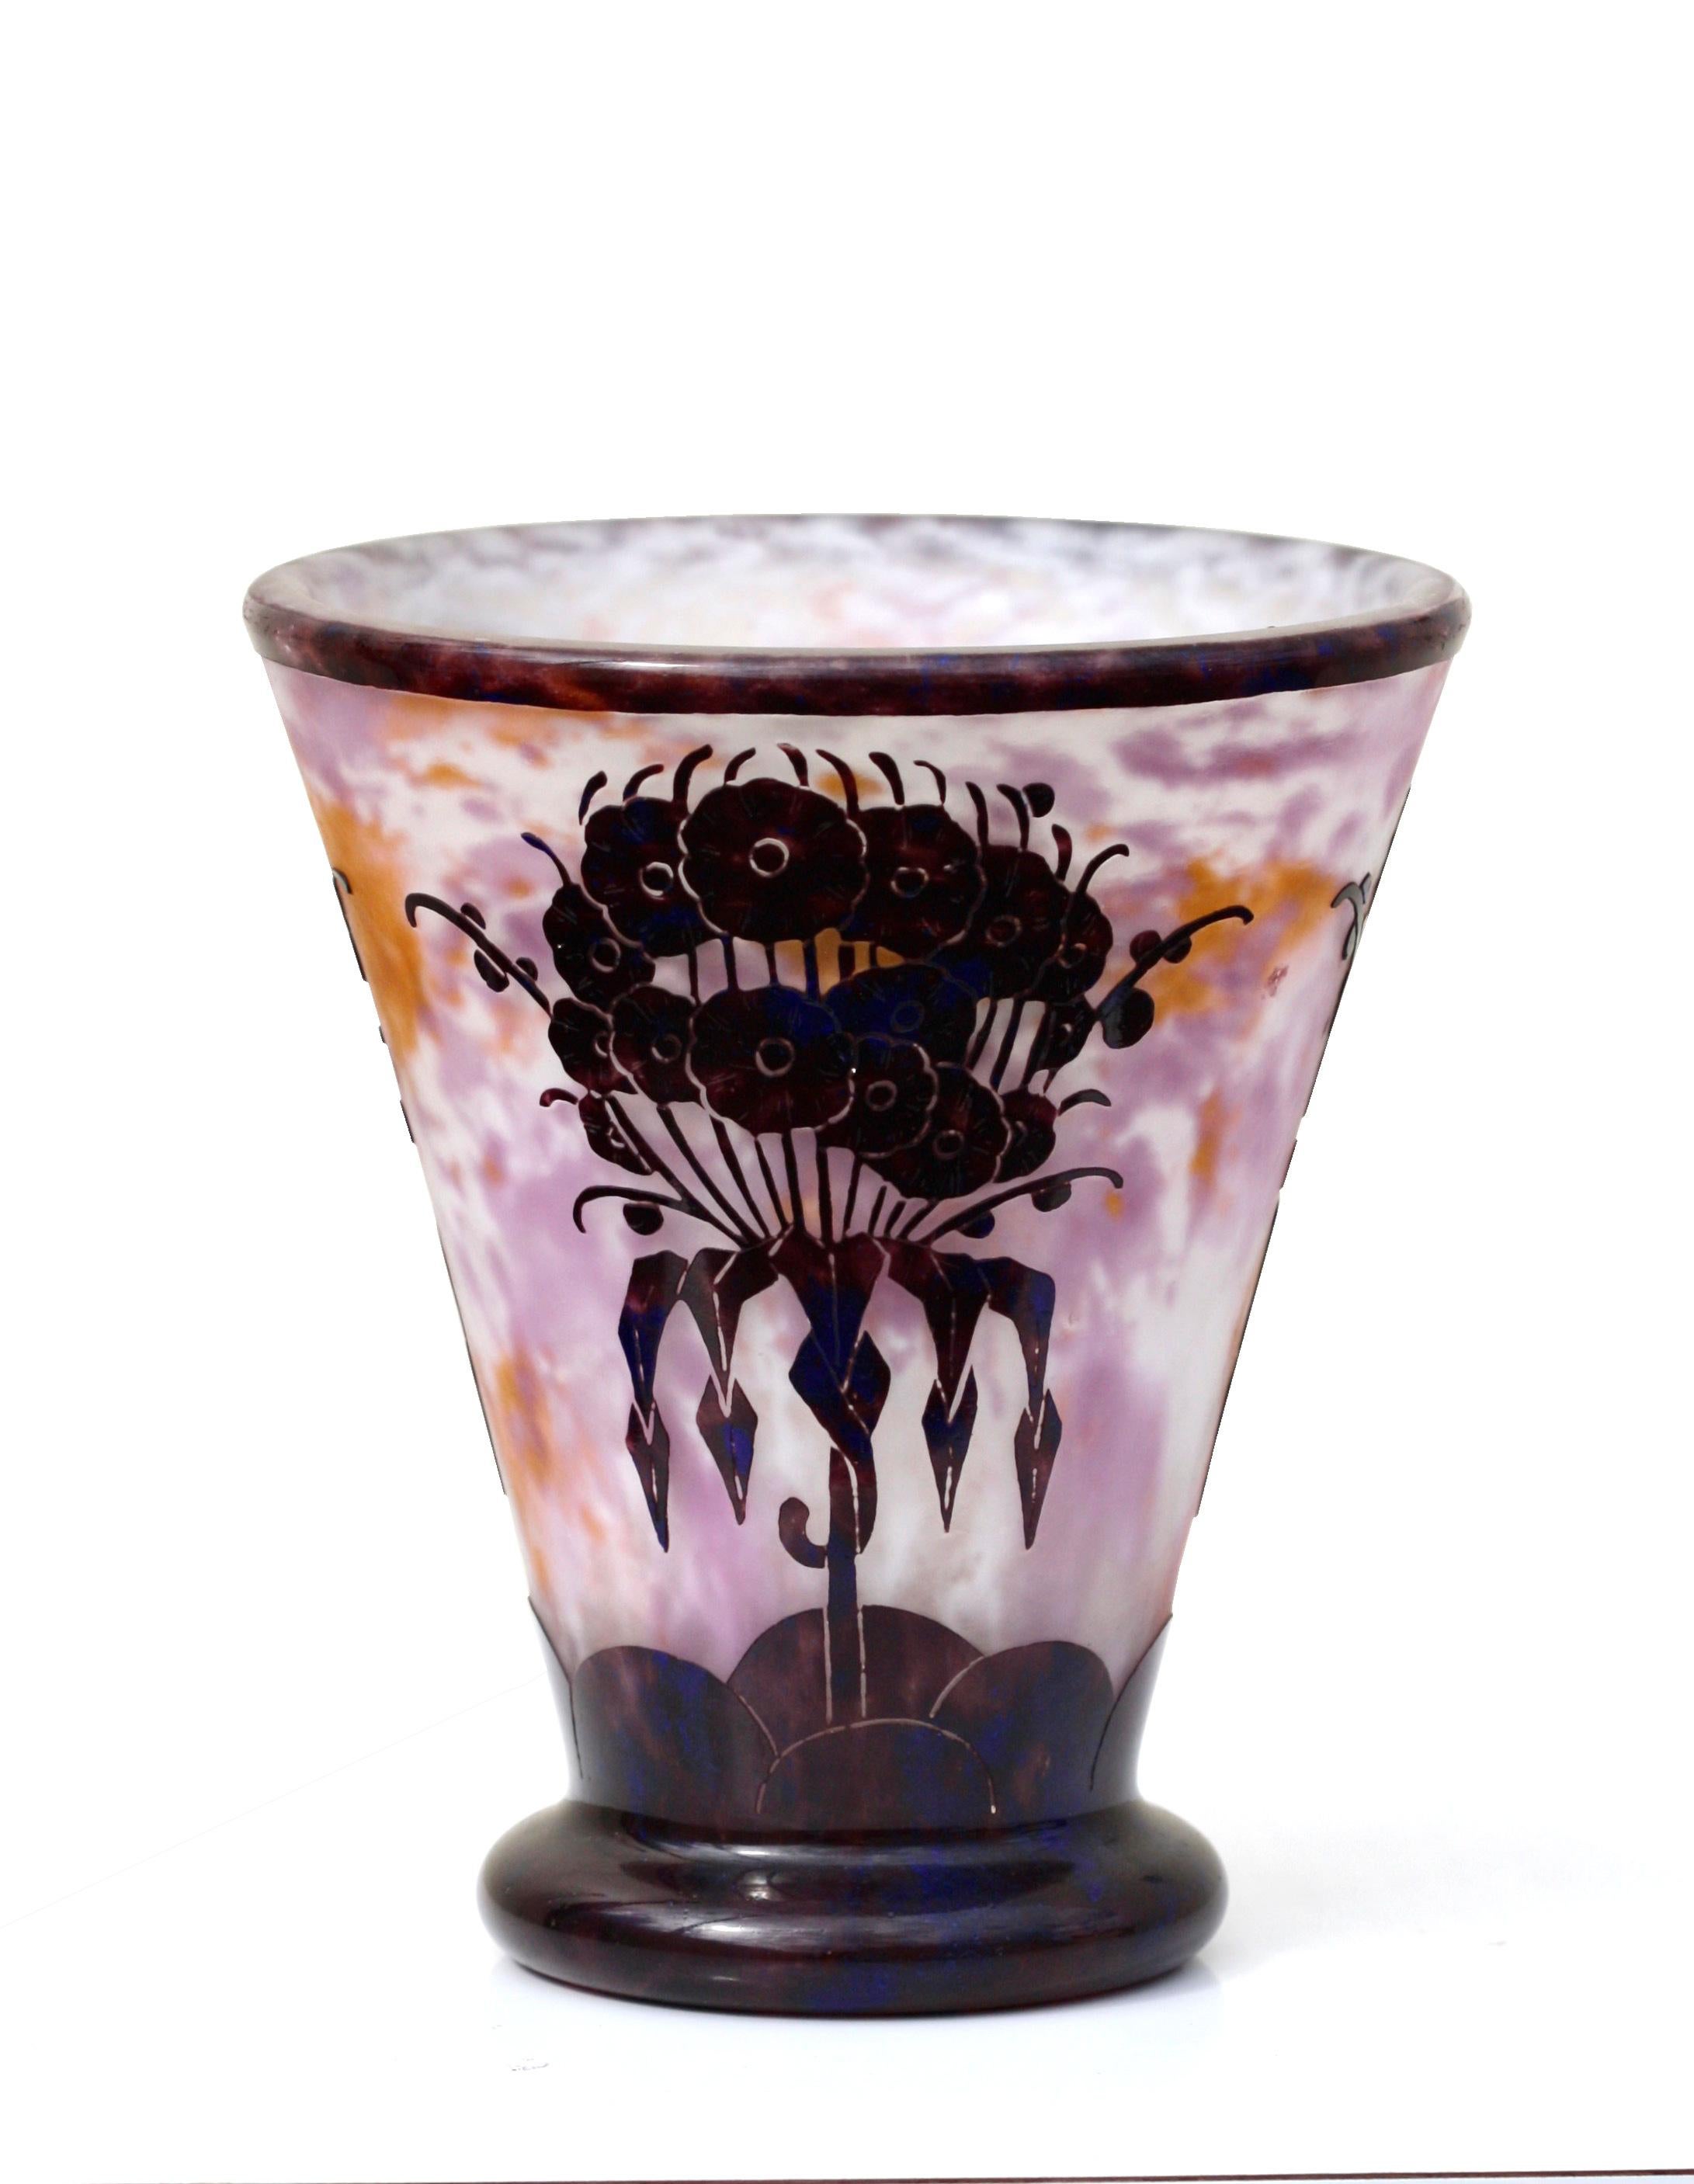 Le Verre Francais Charder Etched Glass Vase, circa 1929-1933 In Good Condition For Sale In West Palm Beach, FL